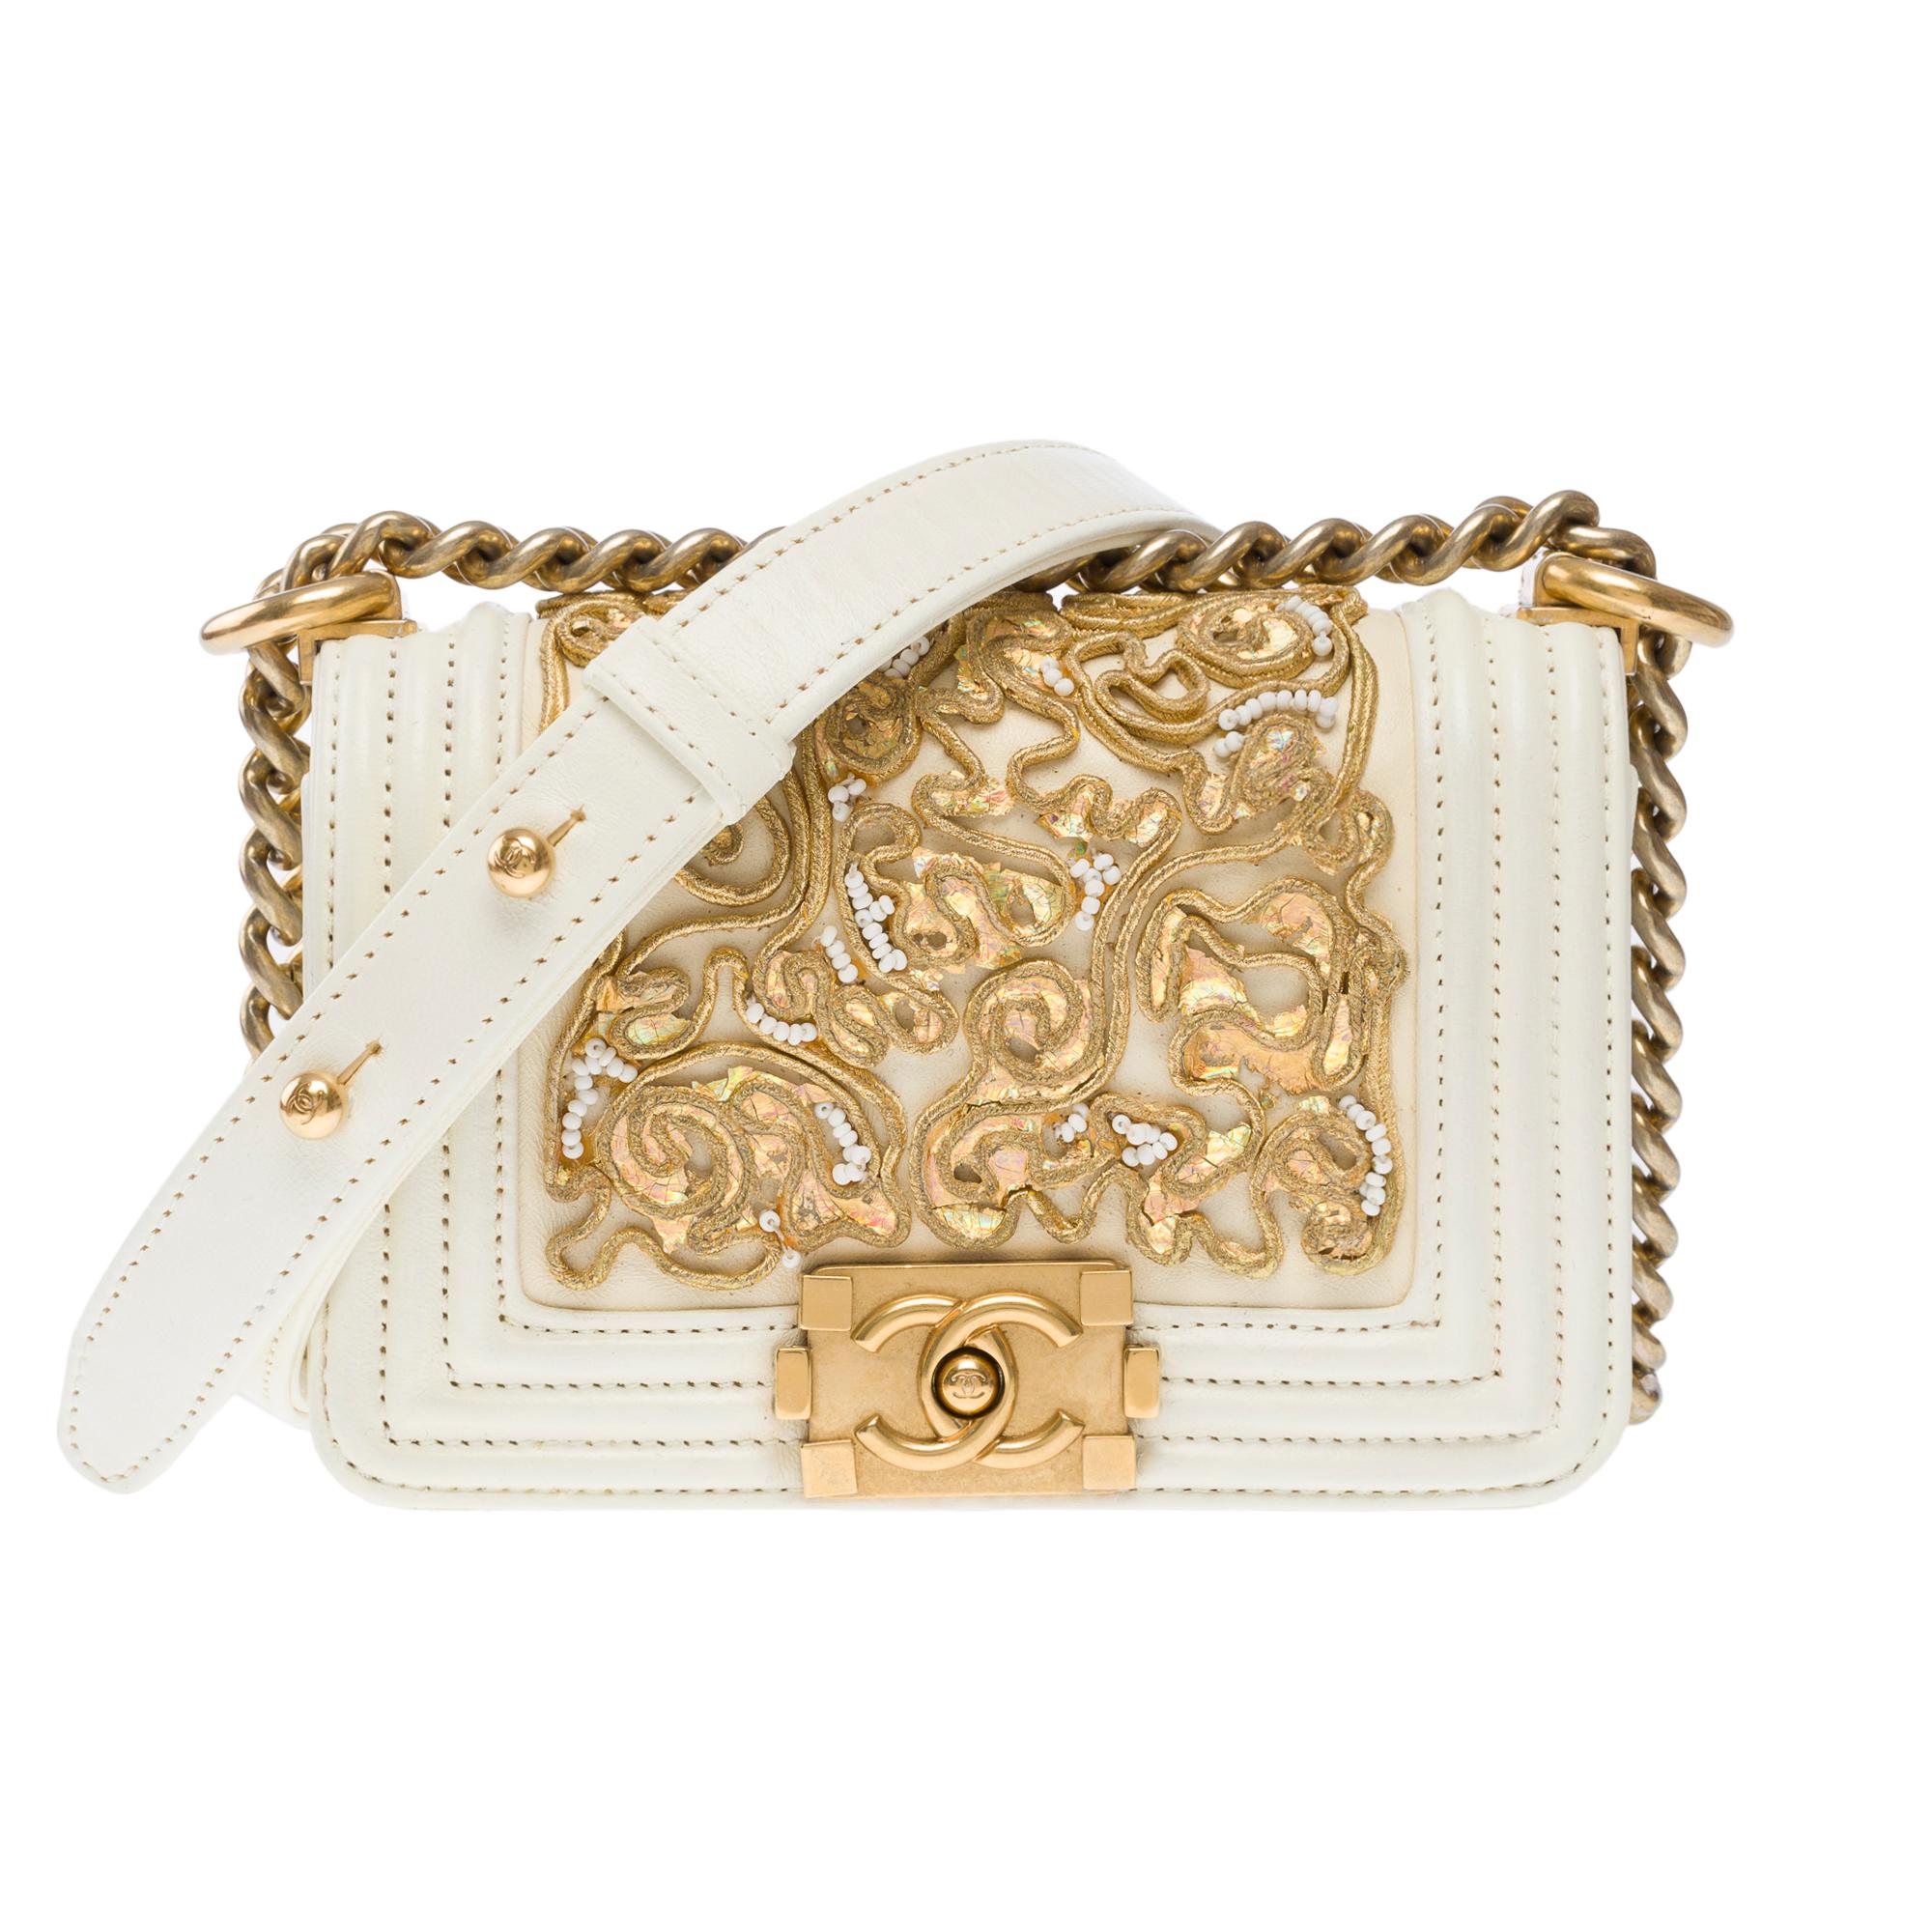 Splendid​ ​&​ ​Rare​ ​Chanel​ ​Mini​ ​Boy​ ​limited​ ​edition​ ​Versailles​ ​Cruise​ ​Collection​ ​shoulder​ ​bag​ ​in​ ​ecru​ ​leather​ ​embellished​ ​with​ ​golden​ ​embroidery​ ​and​ ​white​ ​beads,​ ​matte​ ​gold​ ​metal​ ​trim,​ ​an​